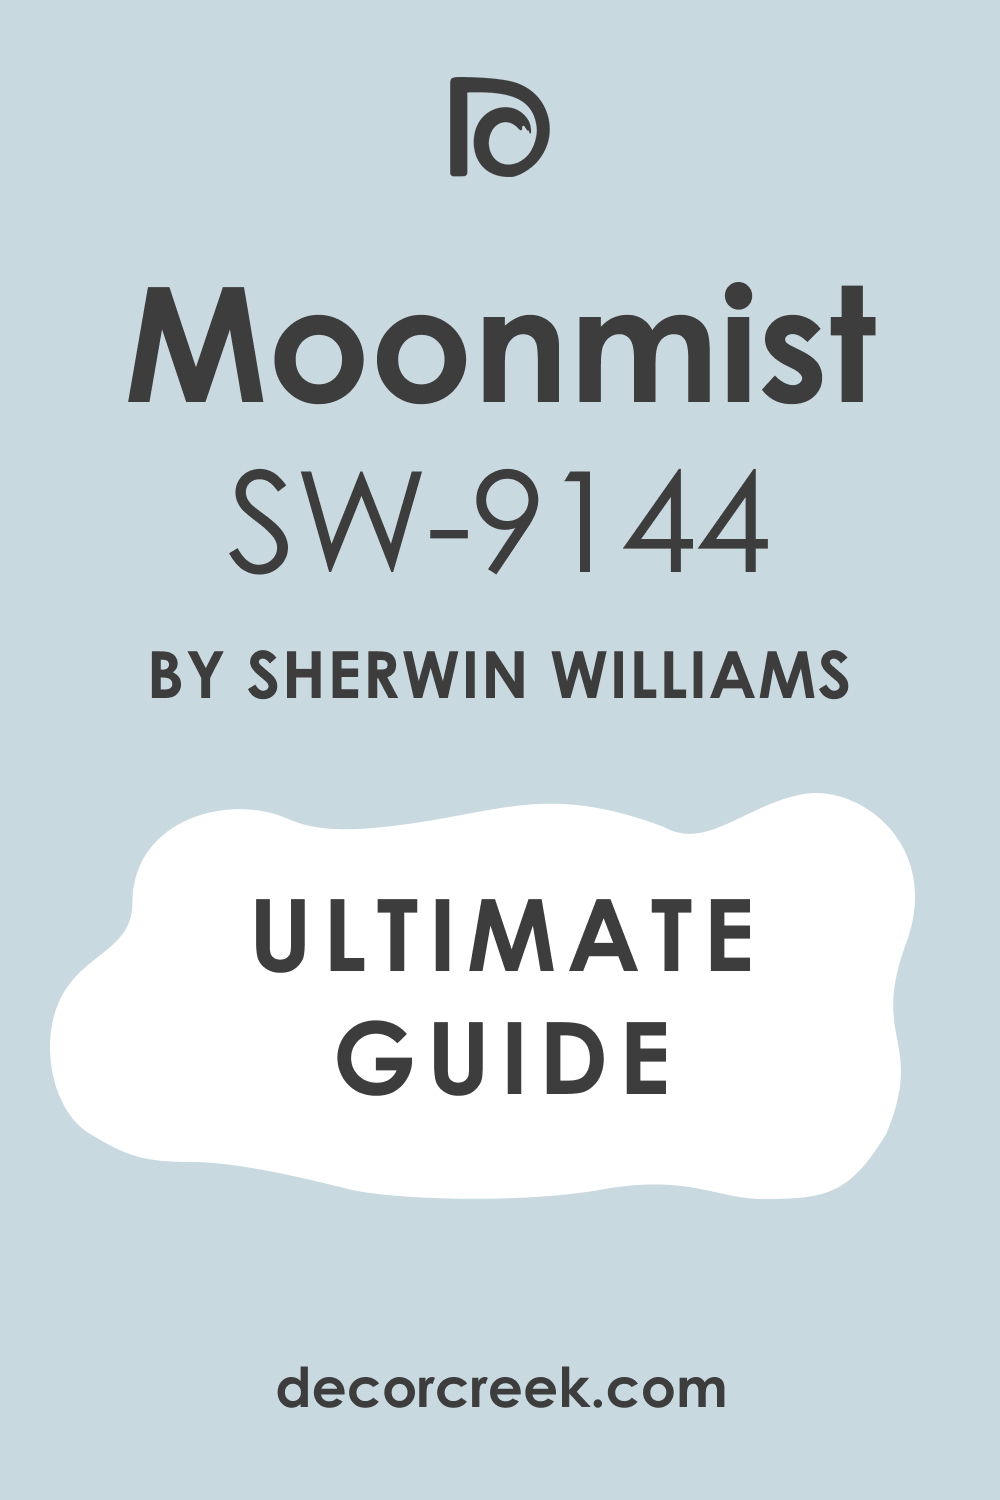 Ultimate Guide of Moonmist SW-9144 